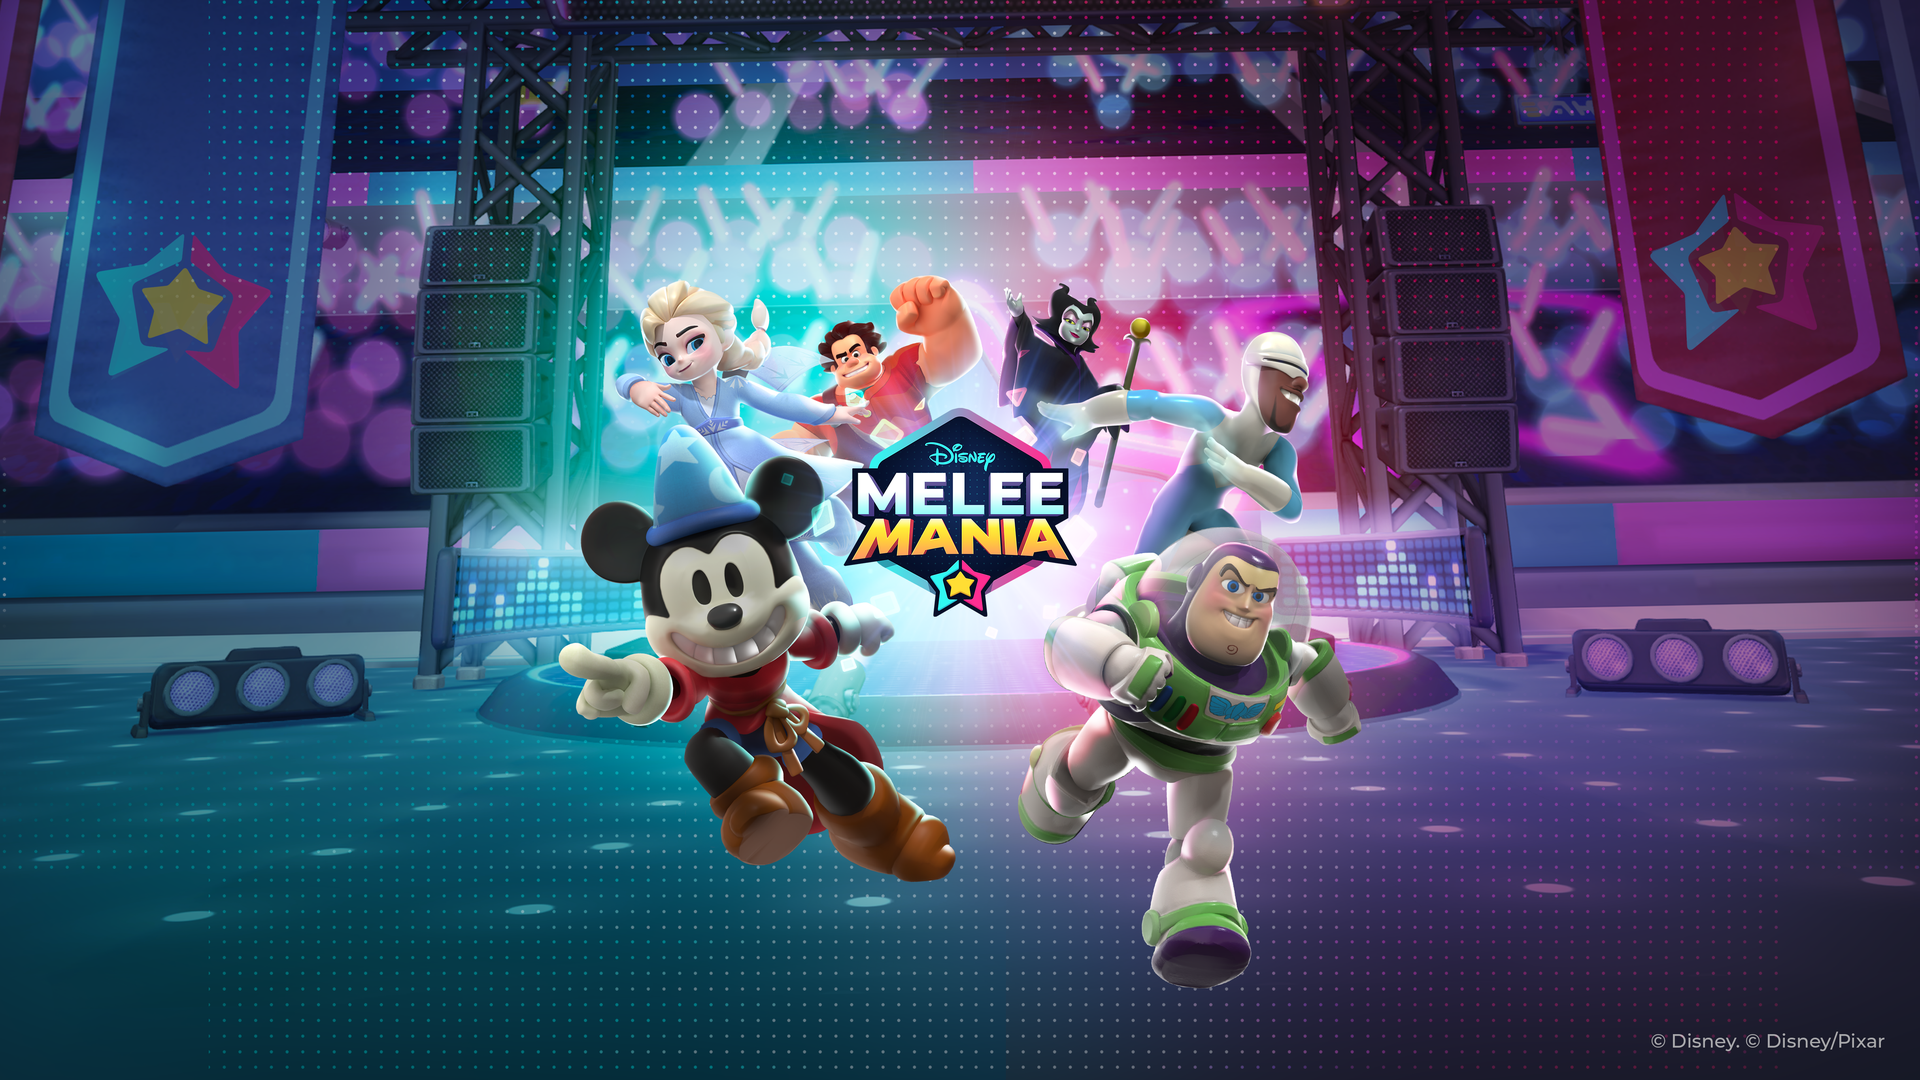 Video game key art showing Disney characters, including Mickey Mouse and Elsa from Frozen